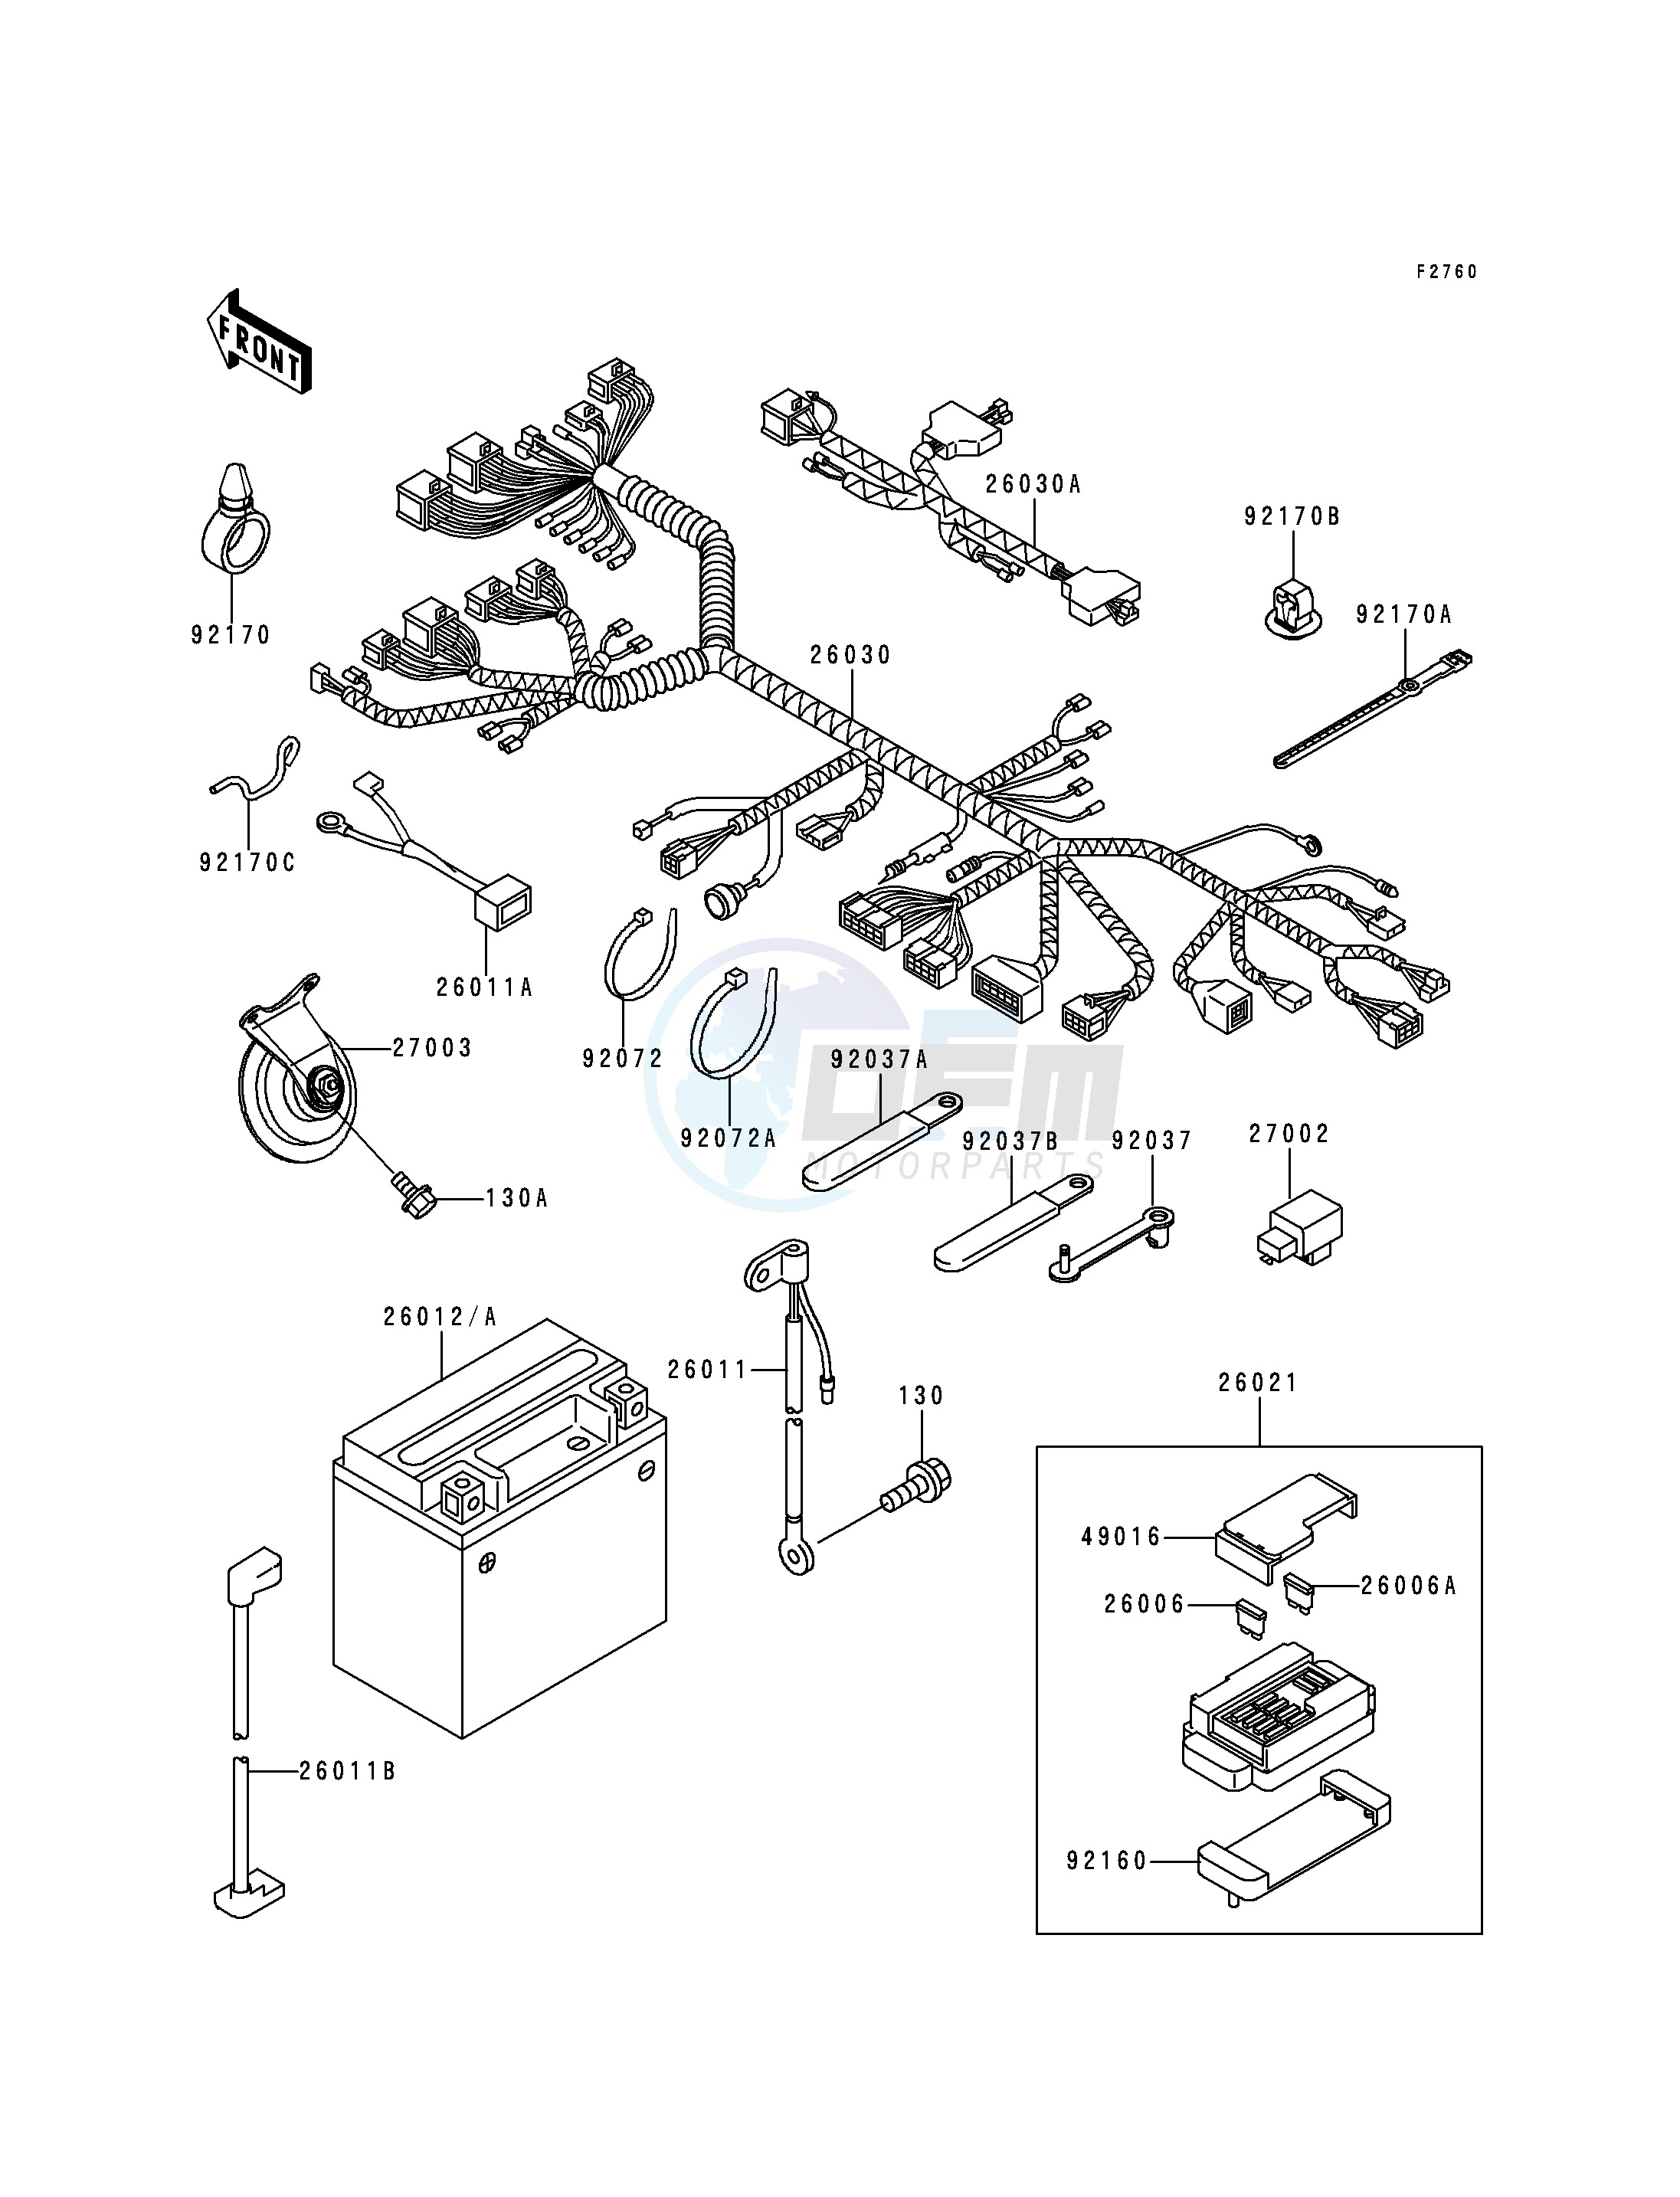 OEM CHASSIS ELECTRICAL EQUIPMENT - Kawasaki [Motorcycle] ZX 750 P 